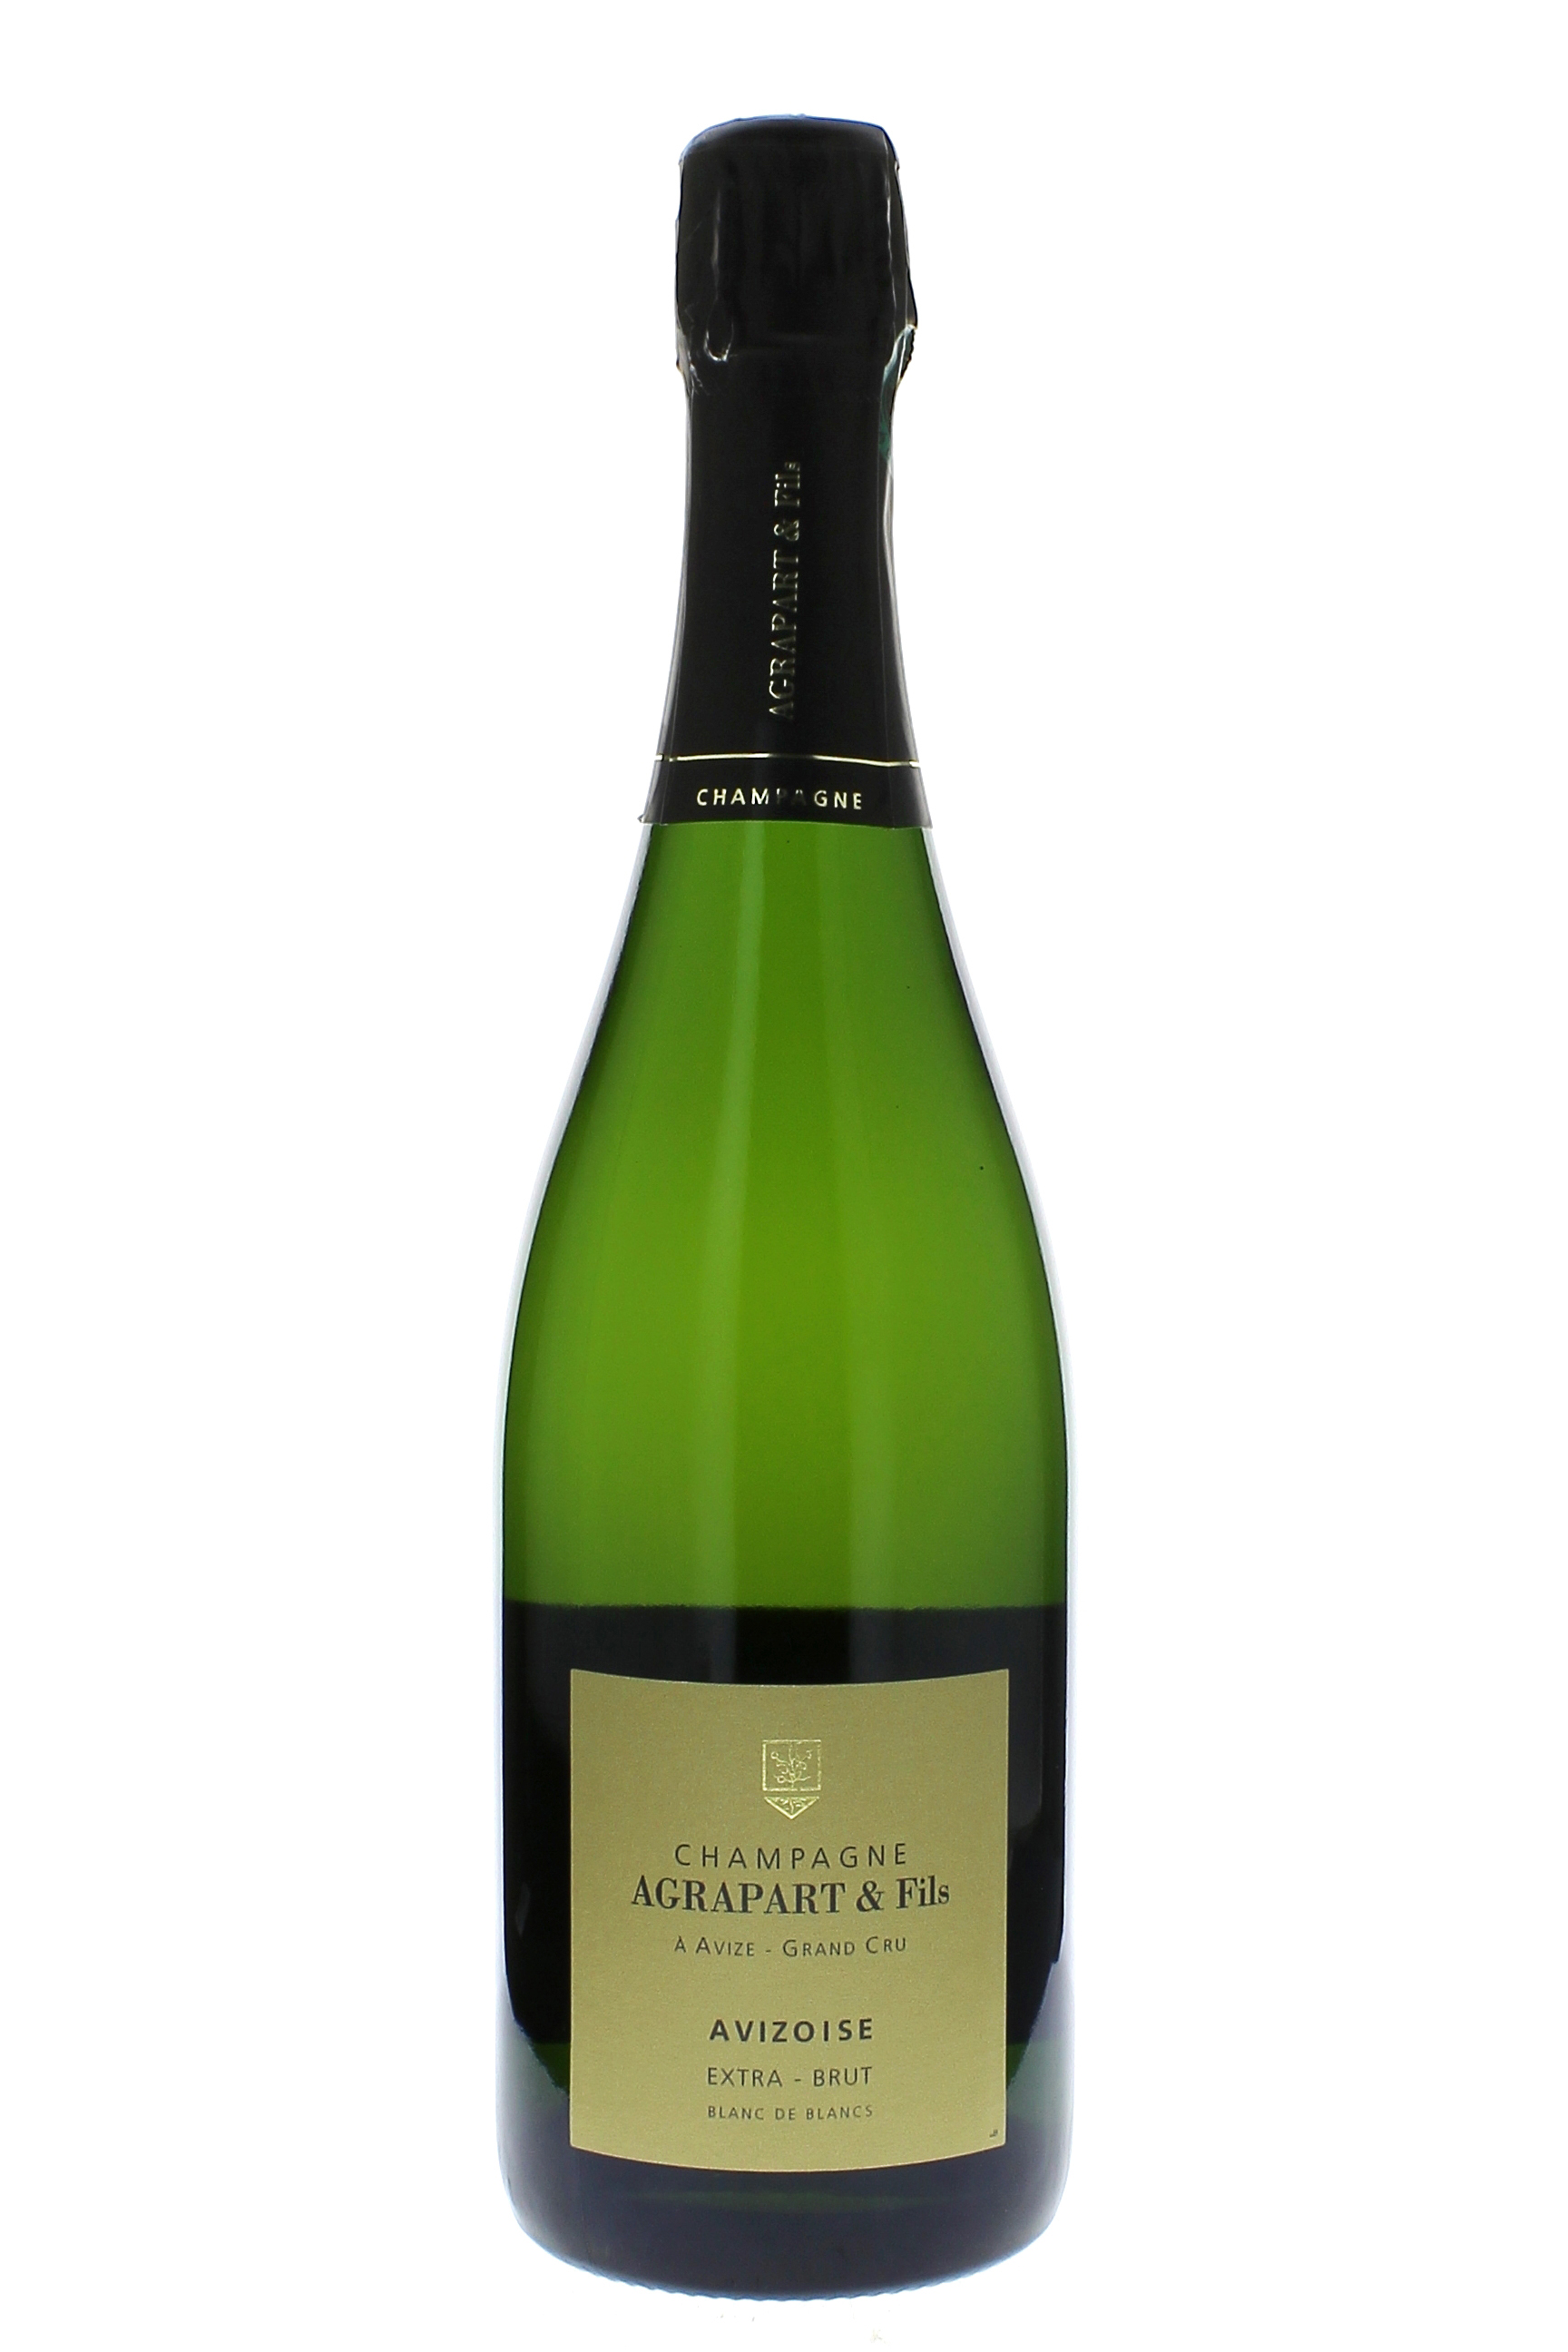 Agrapart  avizoise extra brut 2007  Champagne, Agrapart